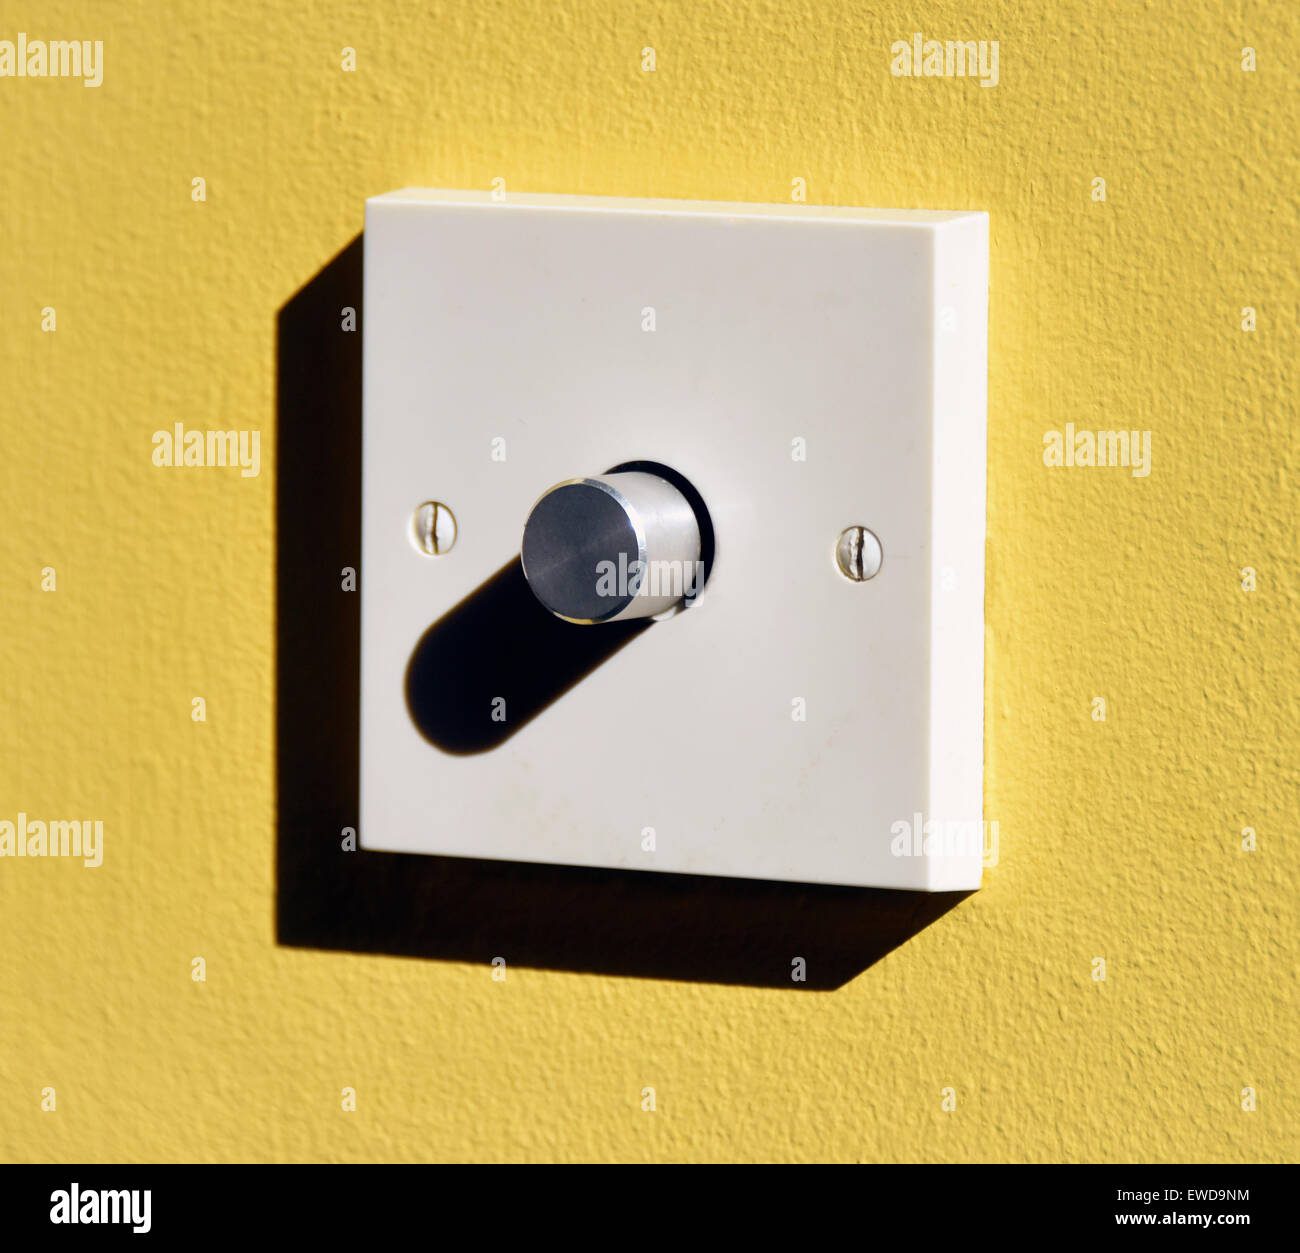 Electric light dimmer switch on yellow wall. Kendal, Cumbria, England, United Kingdom, Europe. Stock Photo